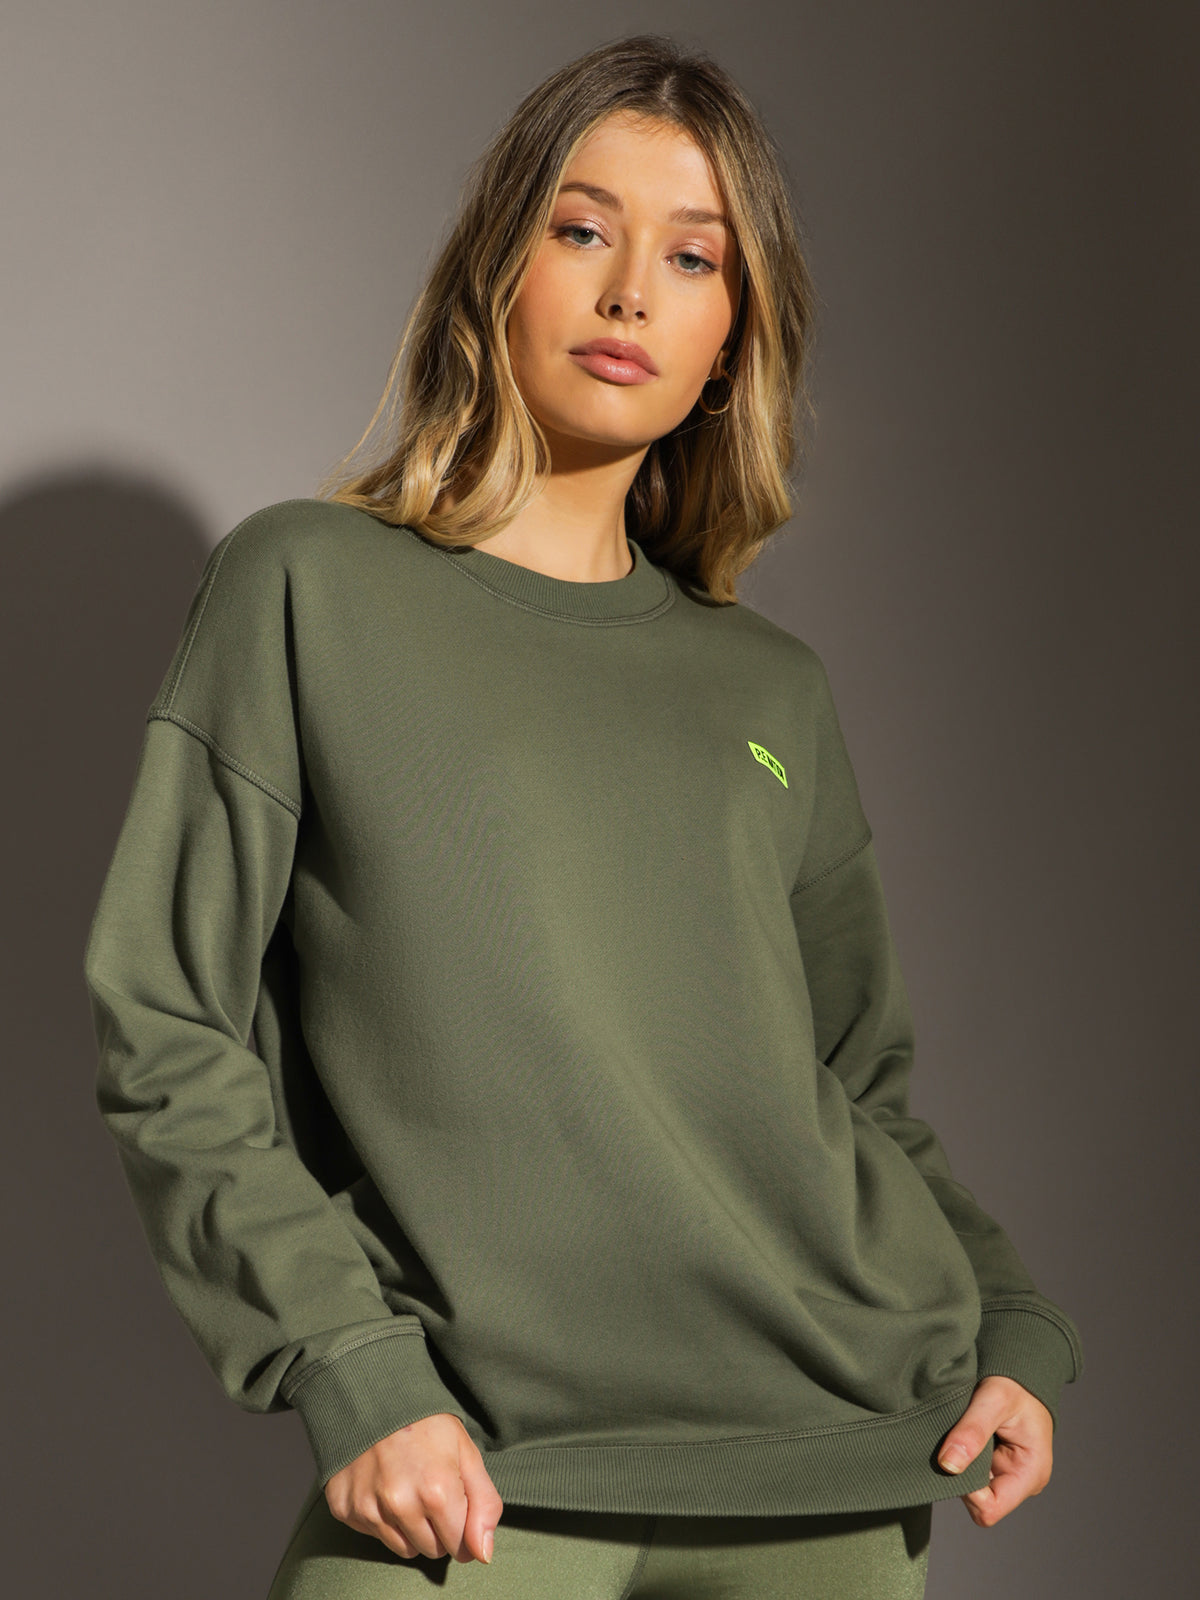 Playout Sweater in Four Leaf Clover Green